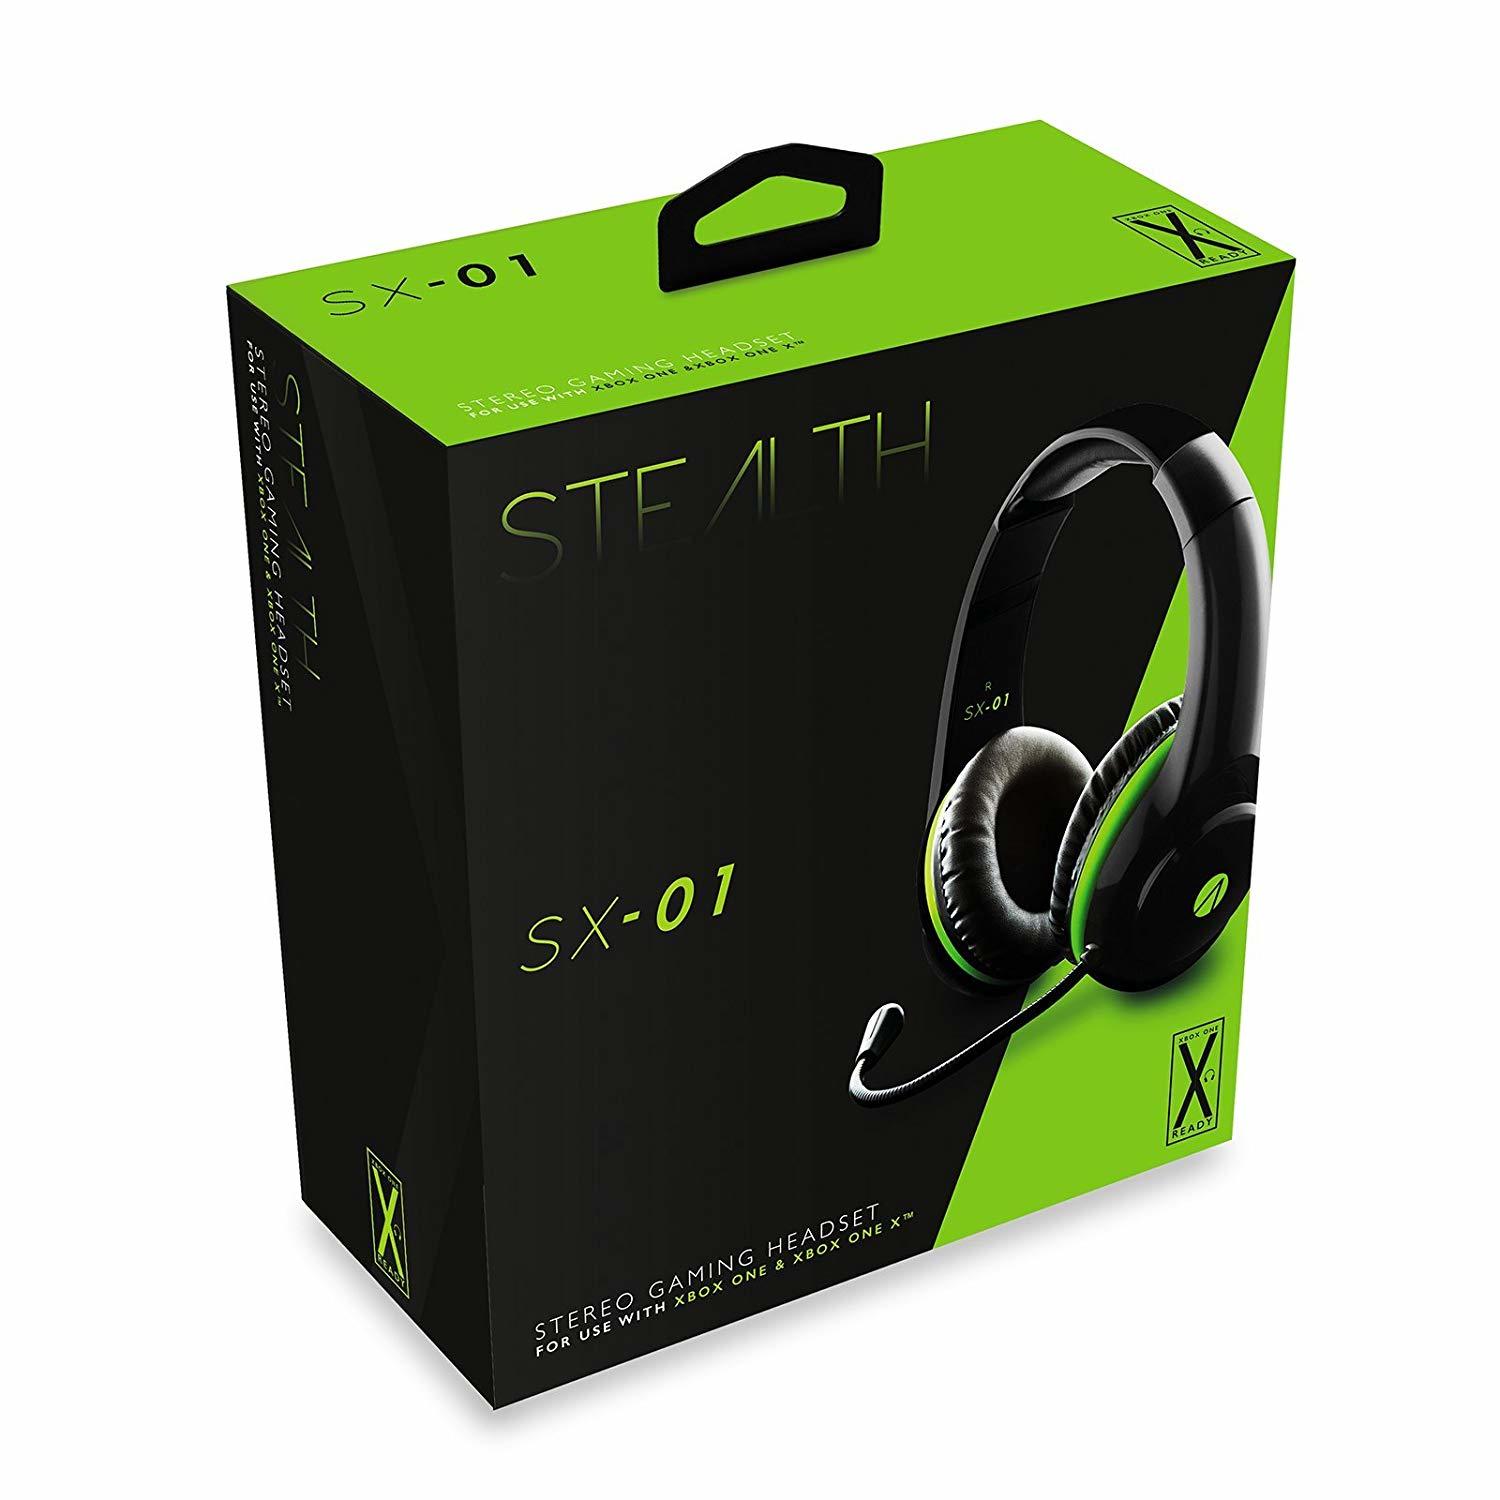 Stealth SX01 Stereo Gaming One) Headset (Xbox